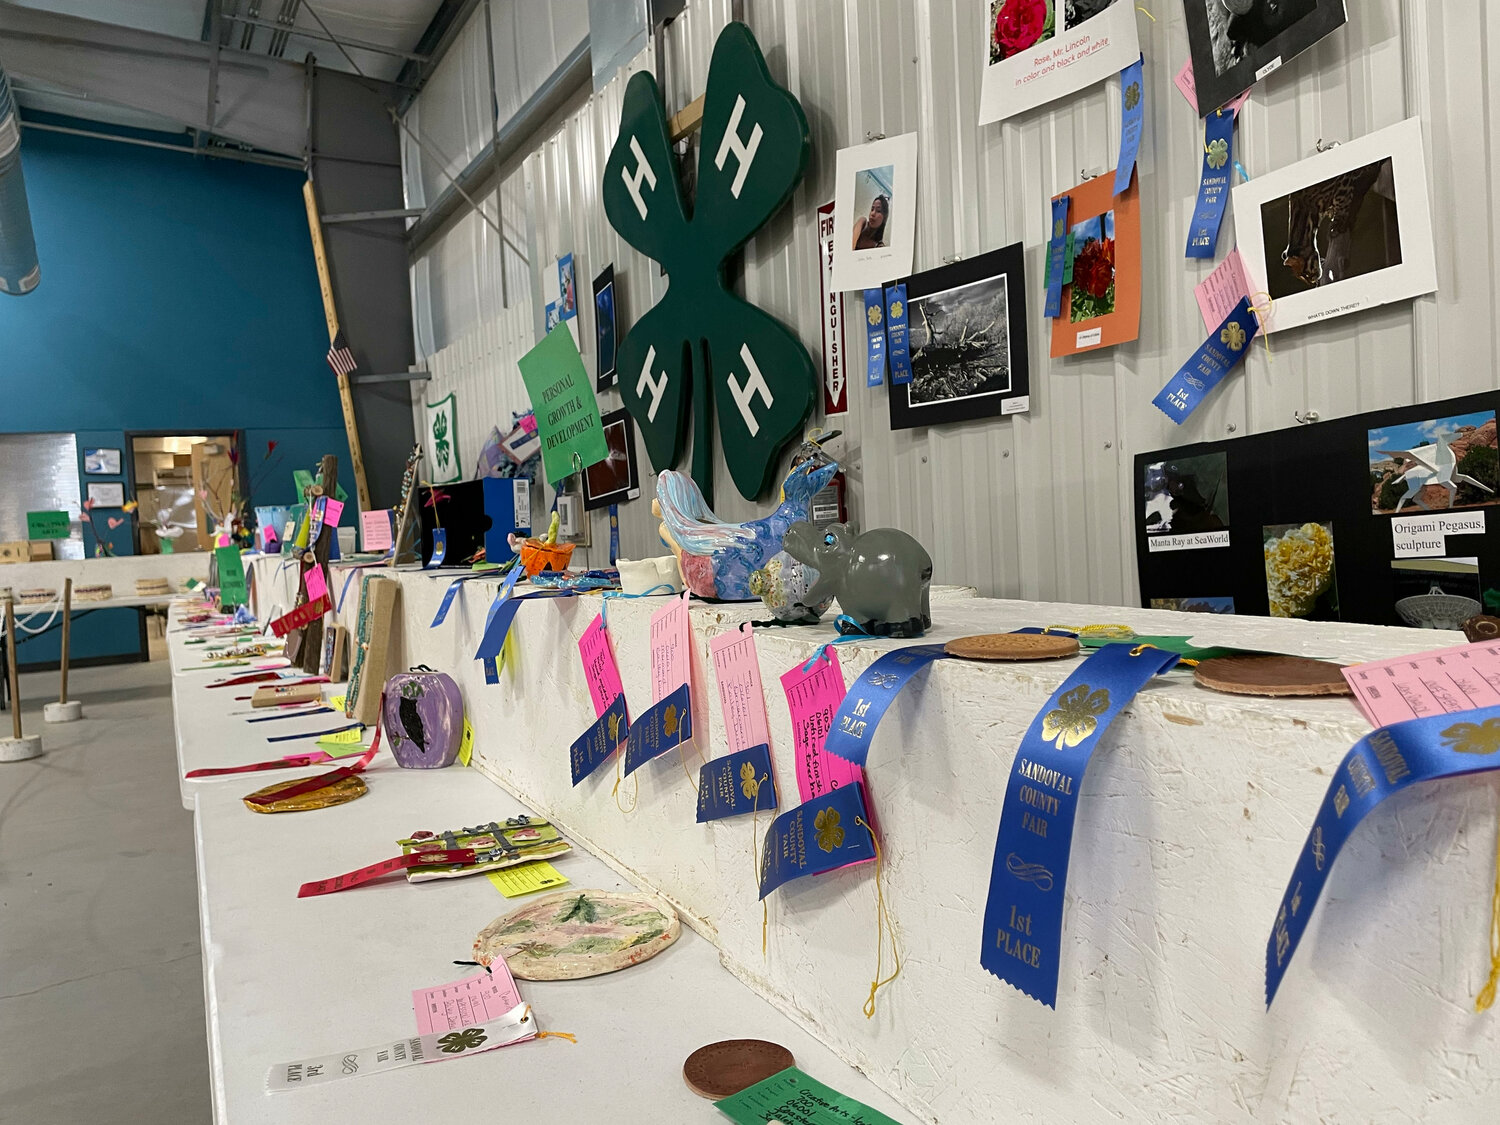 Winners of judged competitions for 4-H and FAA students were on display in the exhibit hall at the Sandoval County Fair.